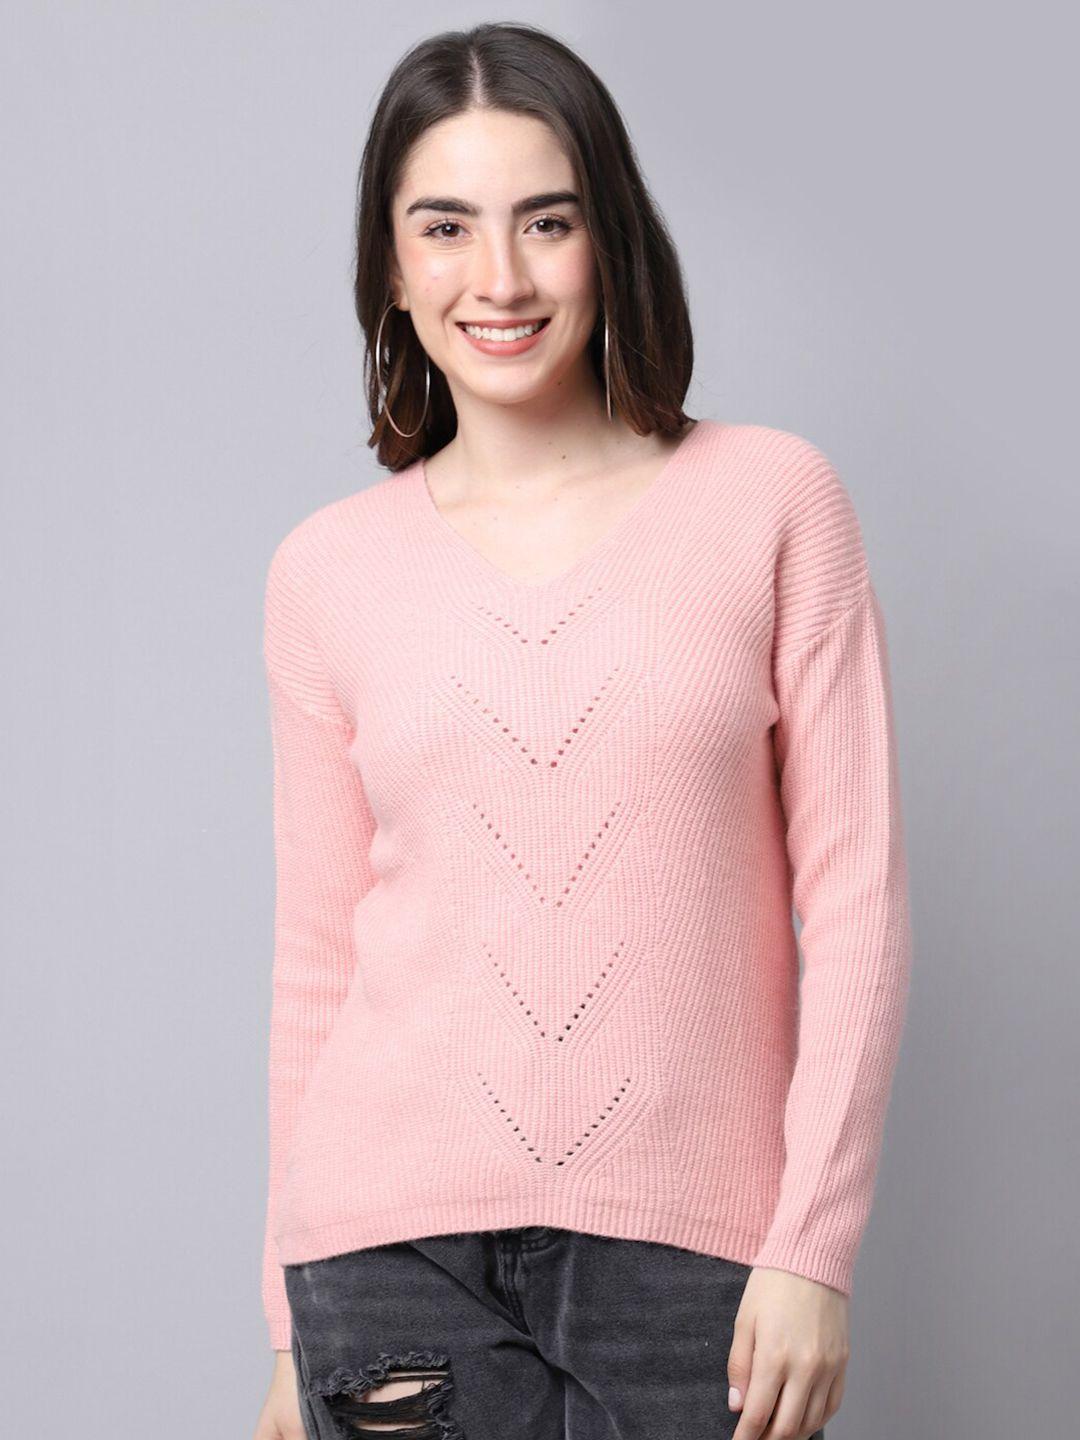 tag-7-pink-knitted-winter-top